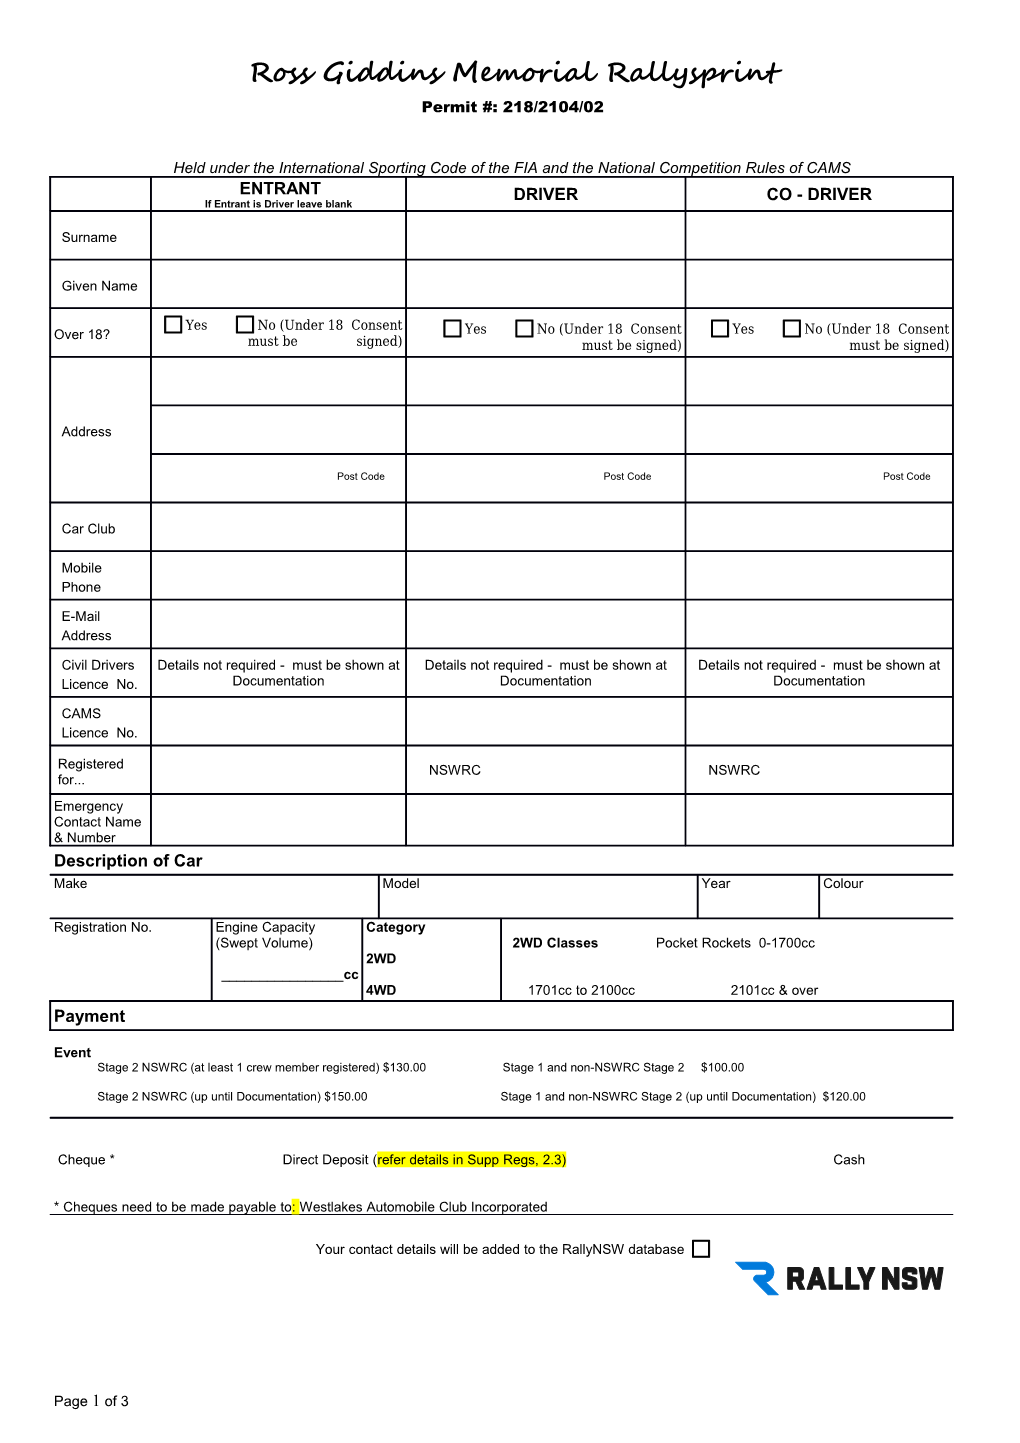 Caltex Airport Starmart Rally - Entry Form